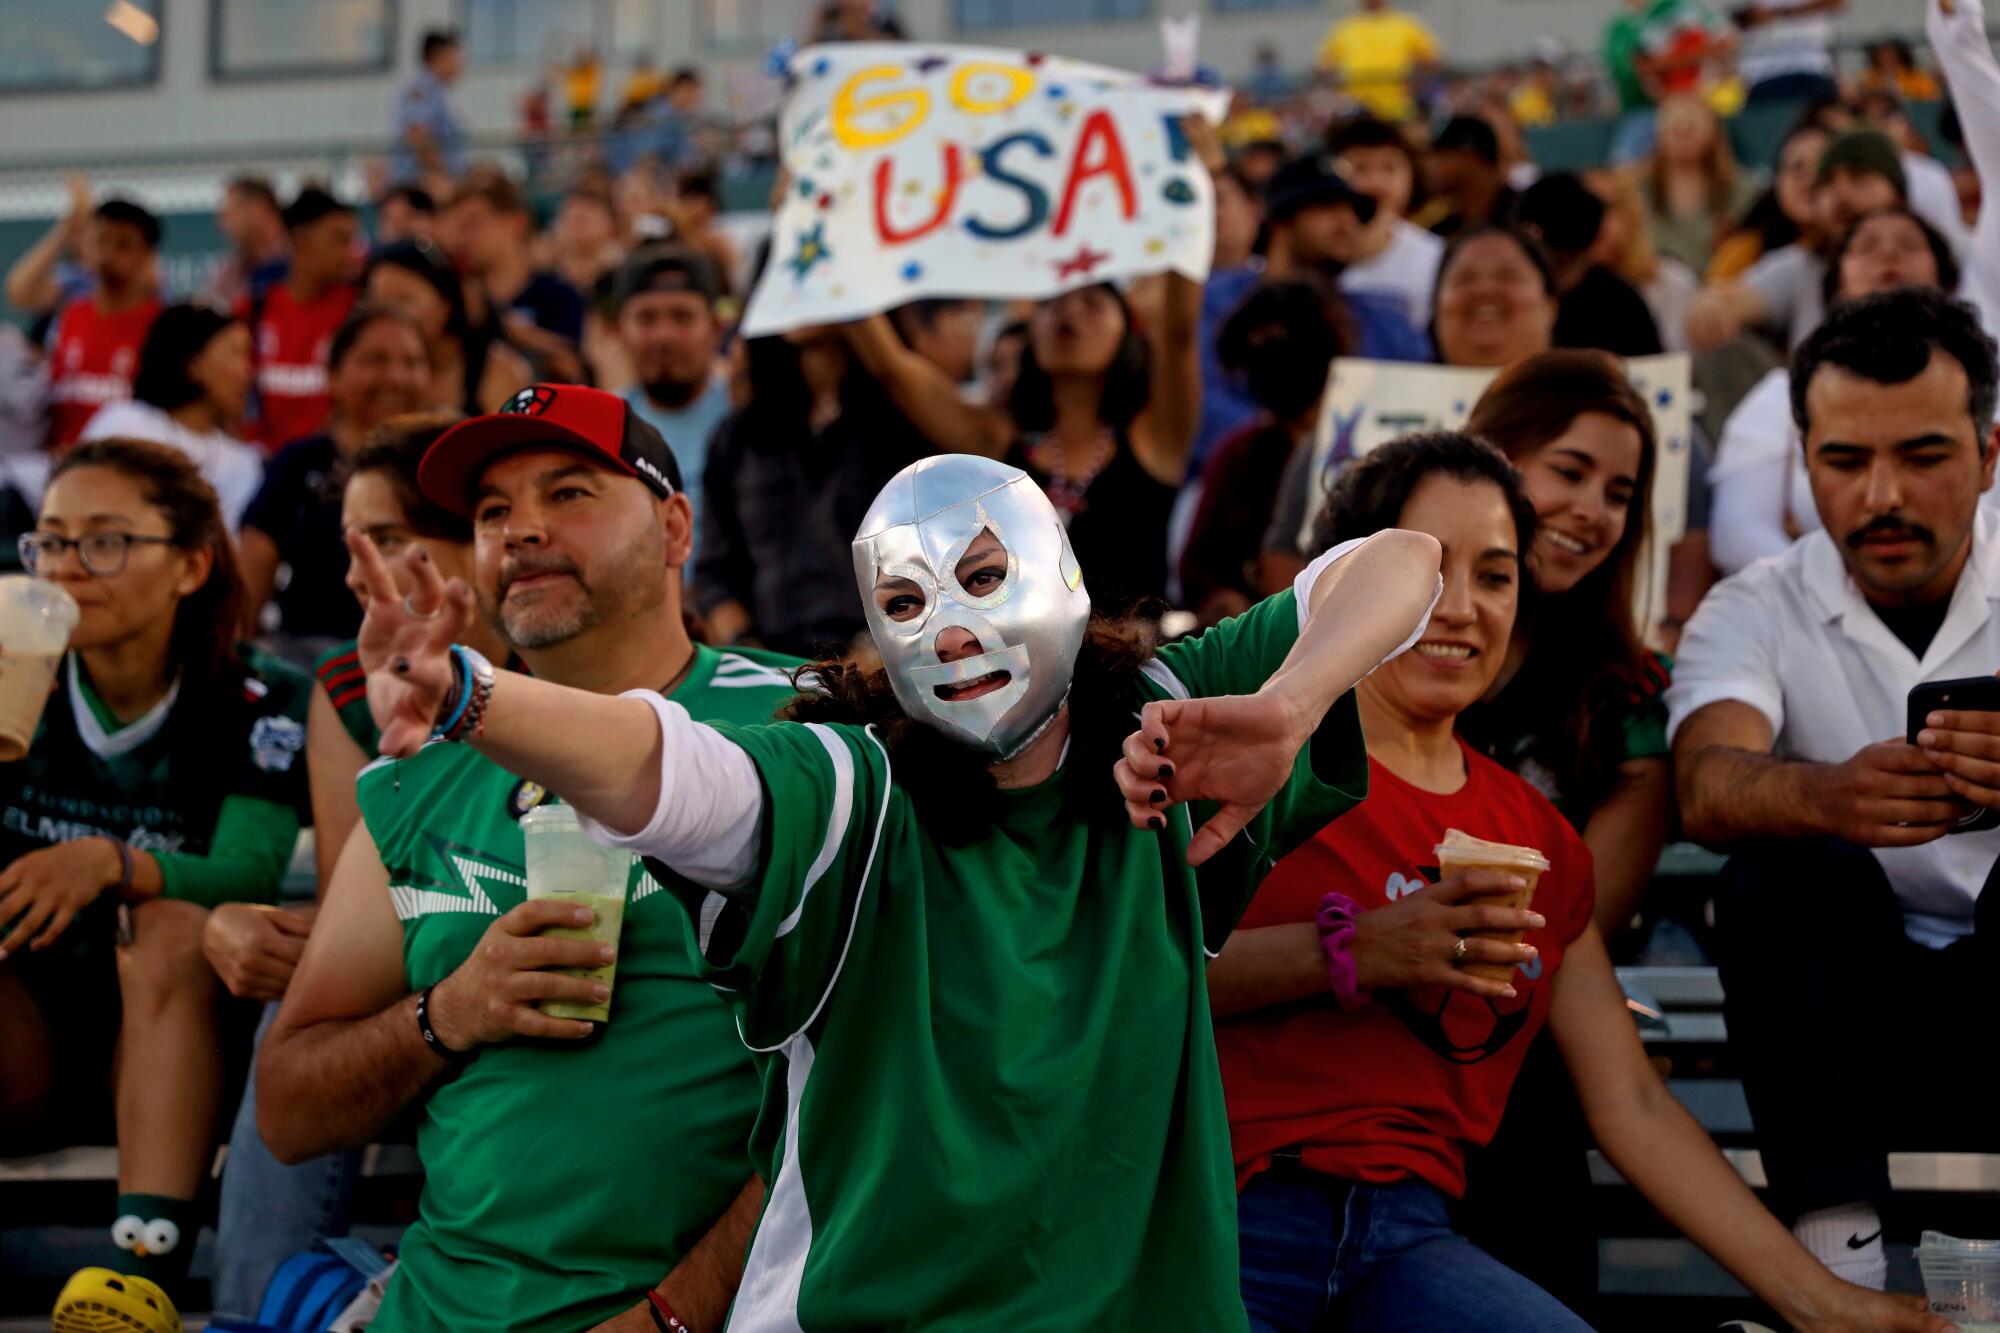 Olivia Flores wears a mask in support of Team Mexico at the Homeless World Cup.